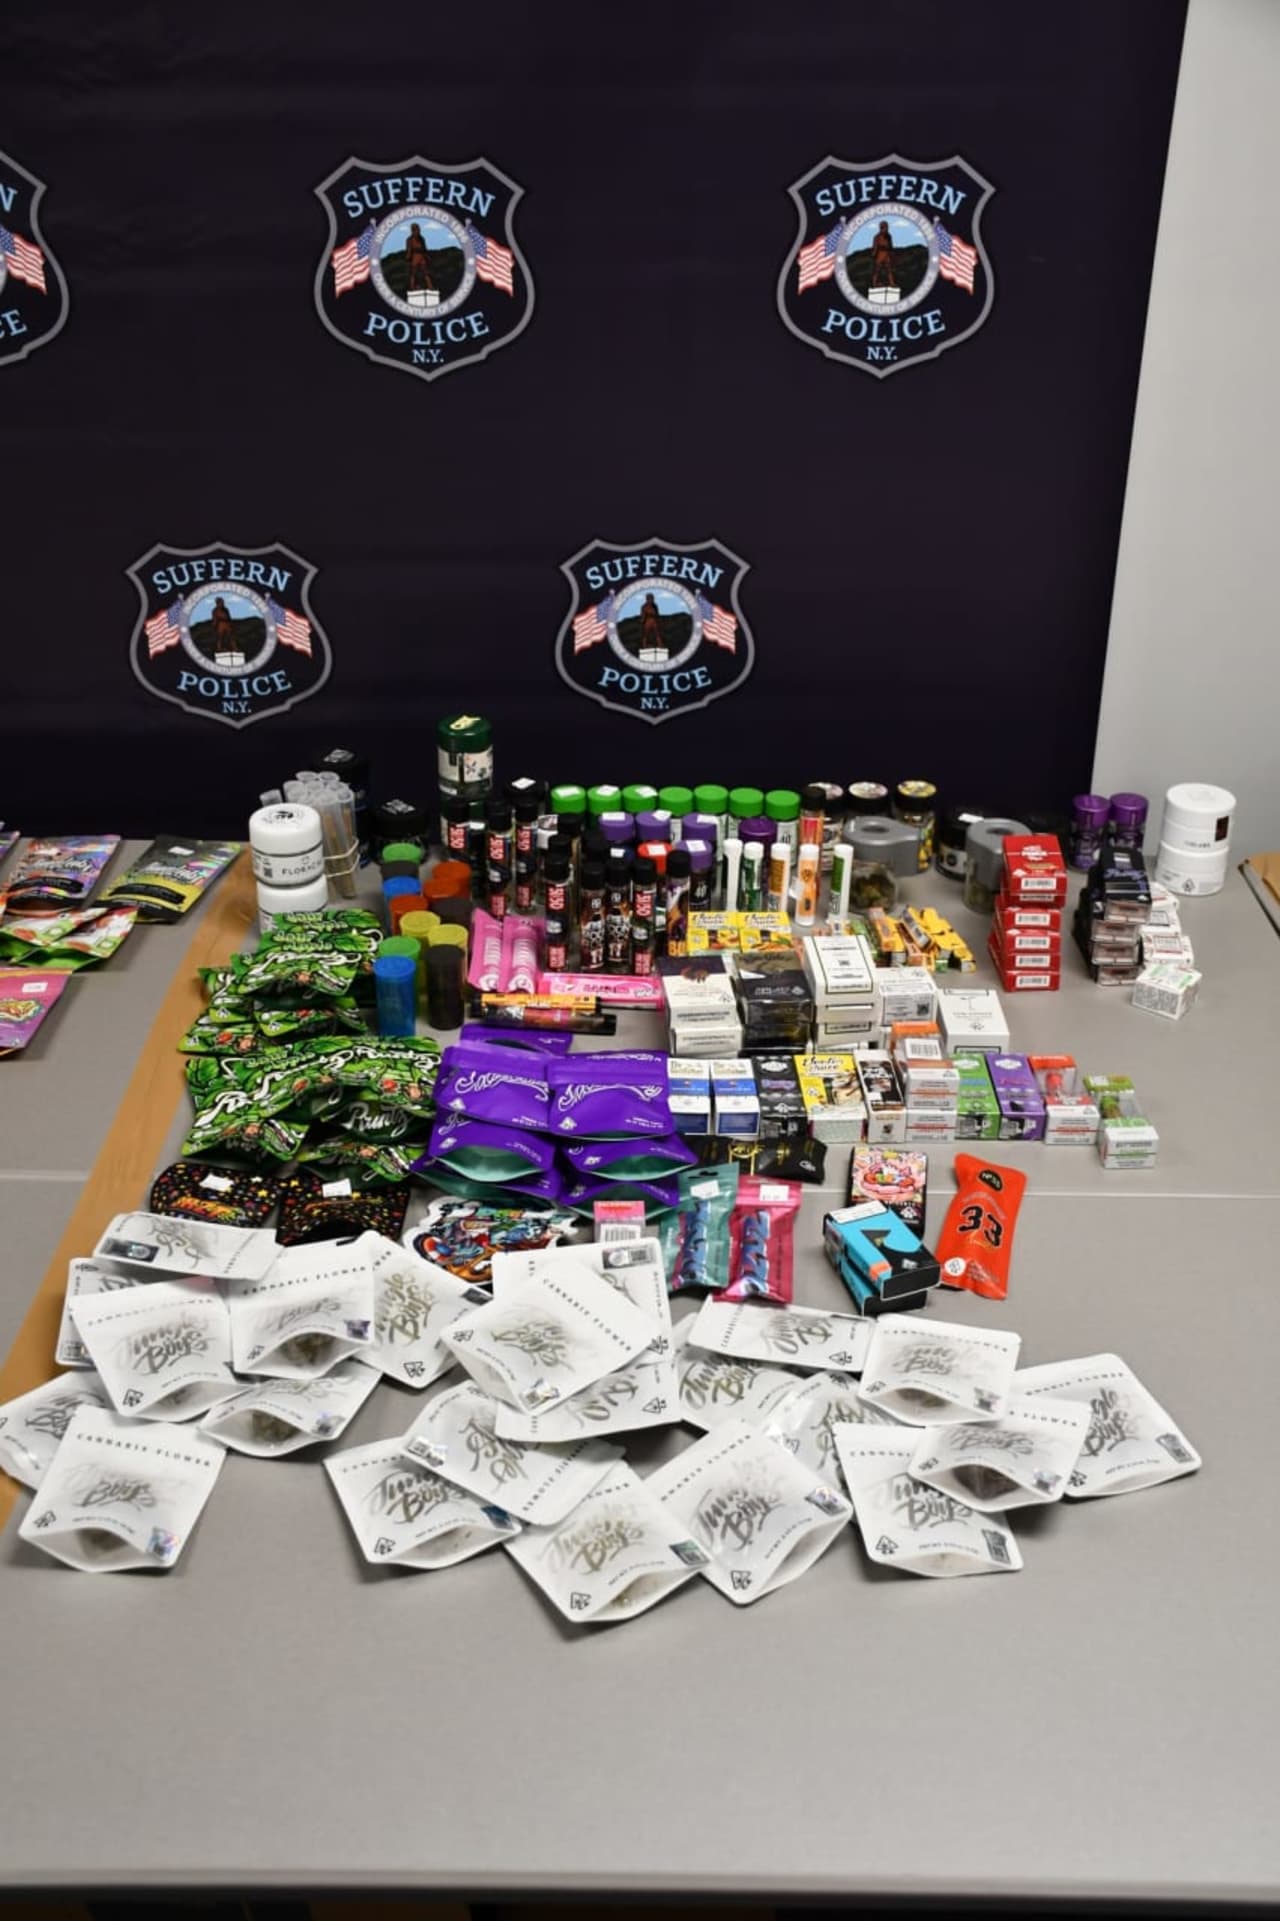 "Many of these products are packaged similarly to normal candy, which can be misleading to parents and children alike," Suffern Police said.